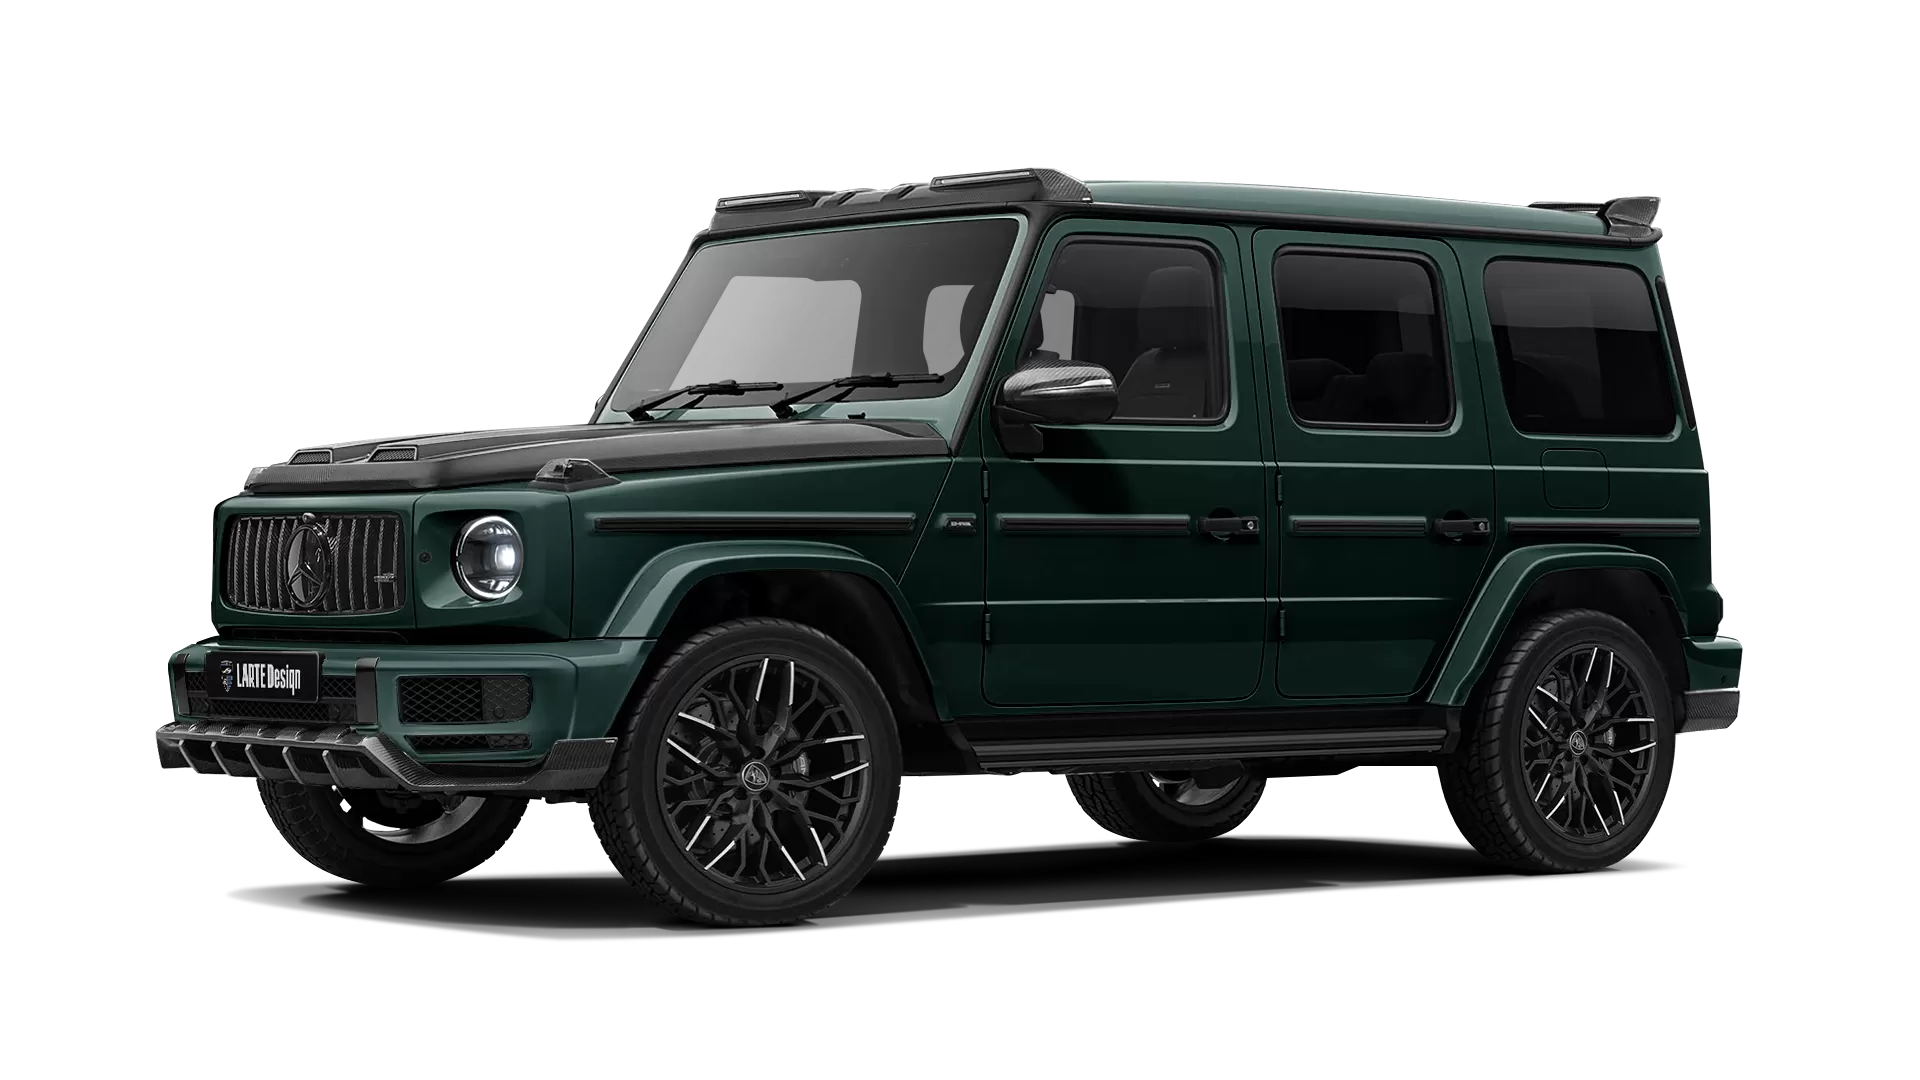 Mercedes G class W463 with carbon body kit: front view shown in Emerald Green